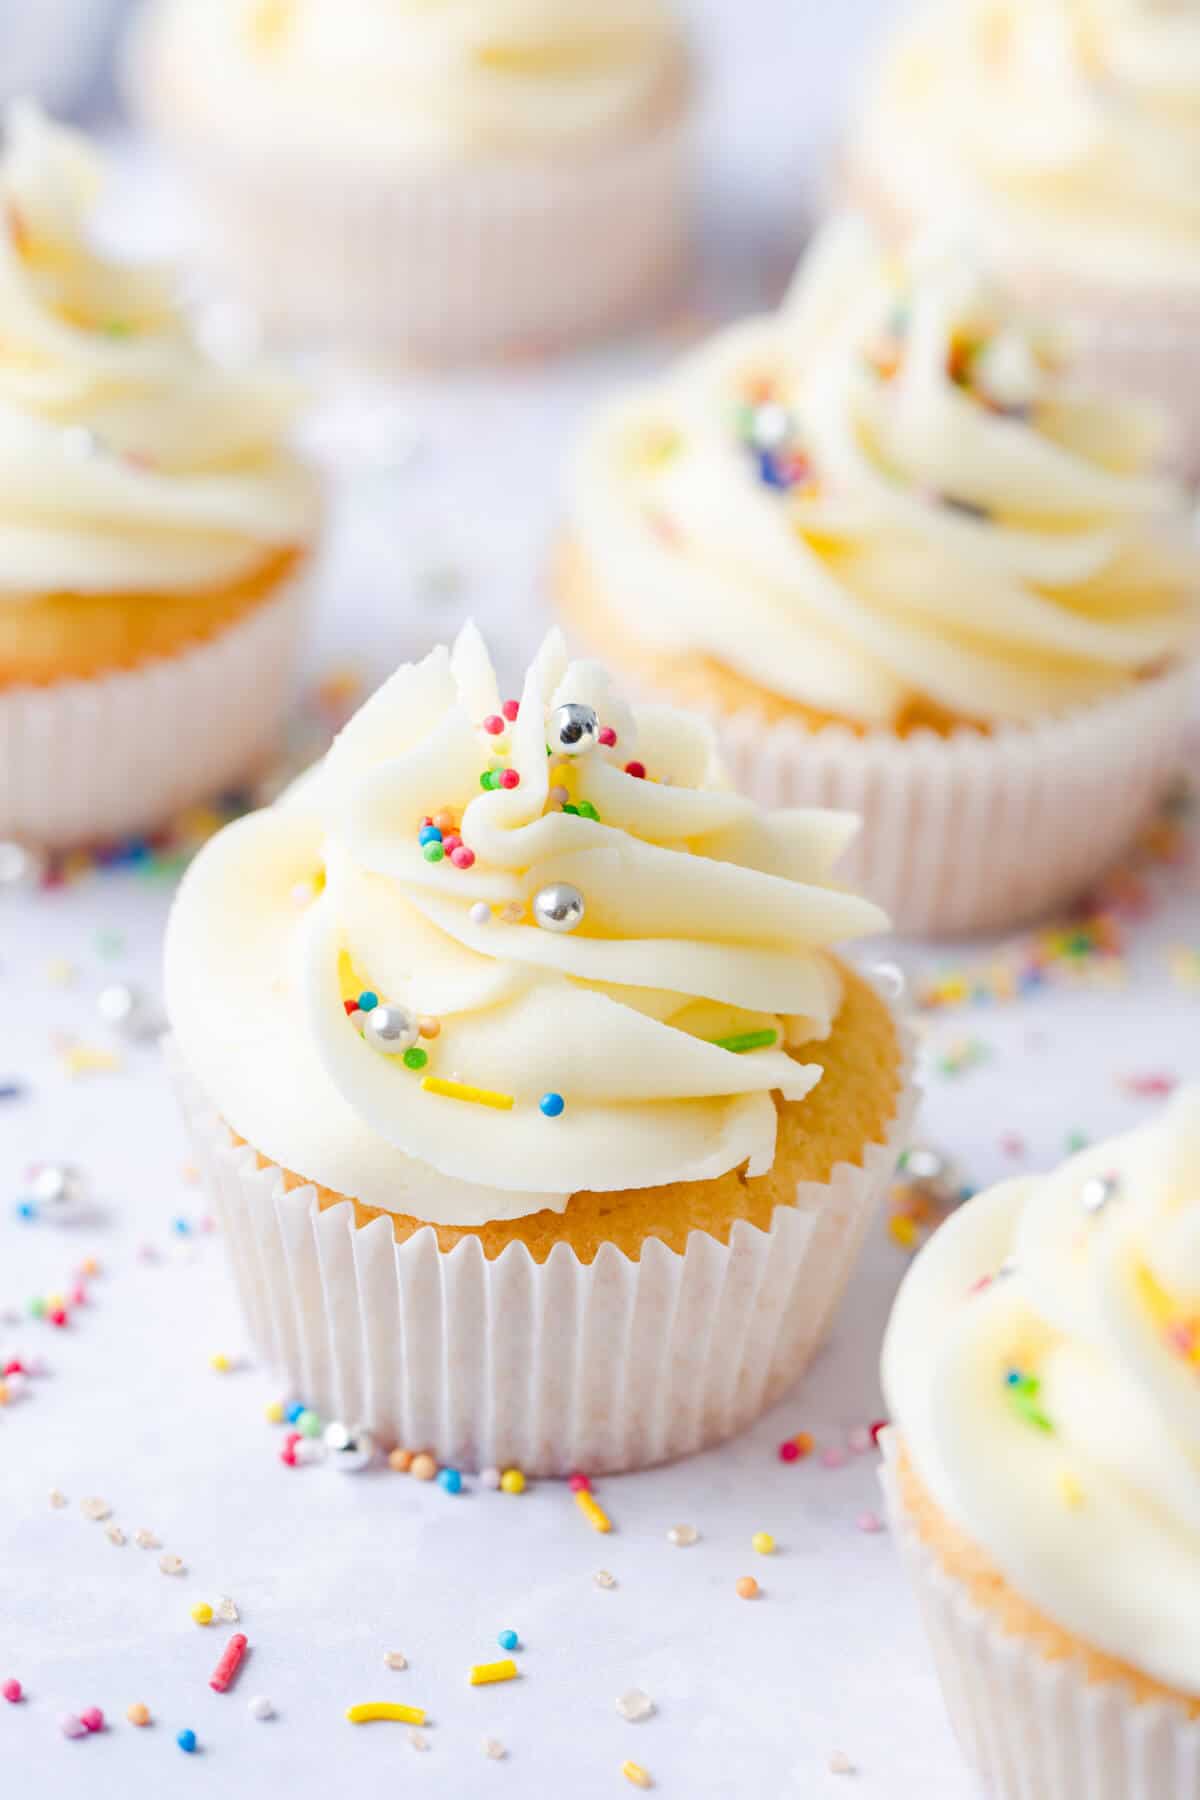 45 degree angle photo of one bowl vanilla cupcake topped with sprinkles and buttercream